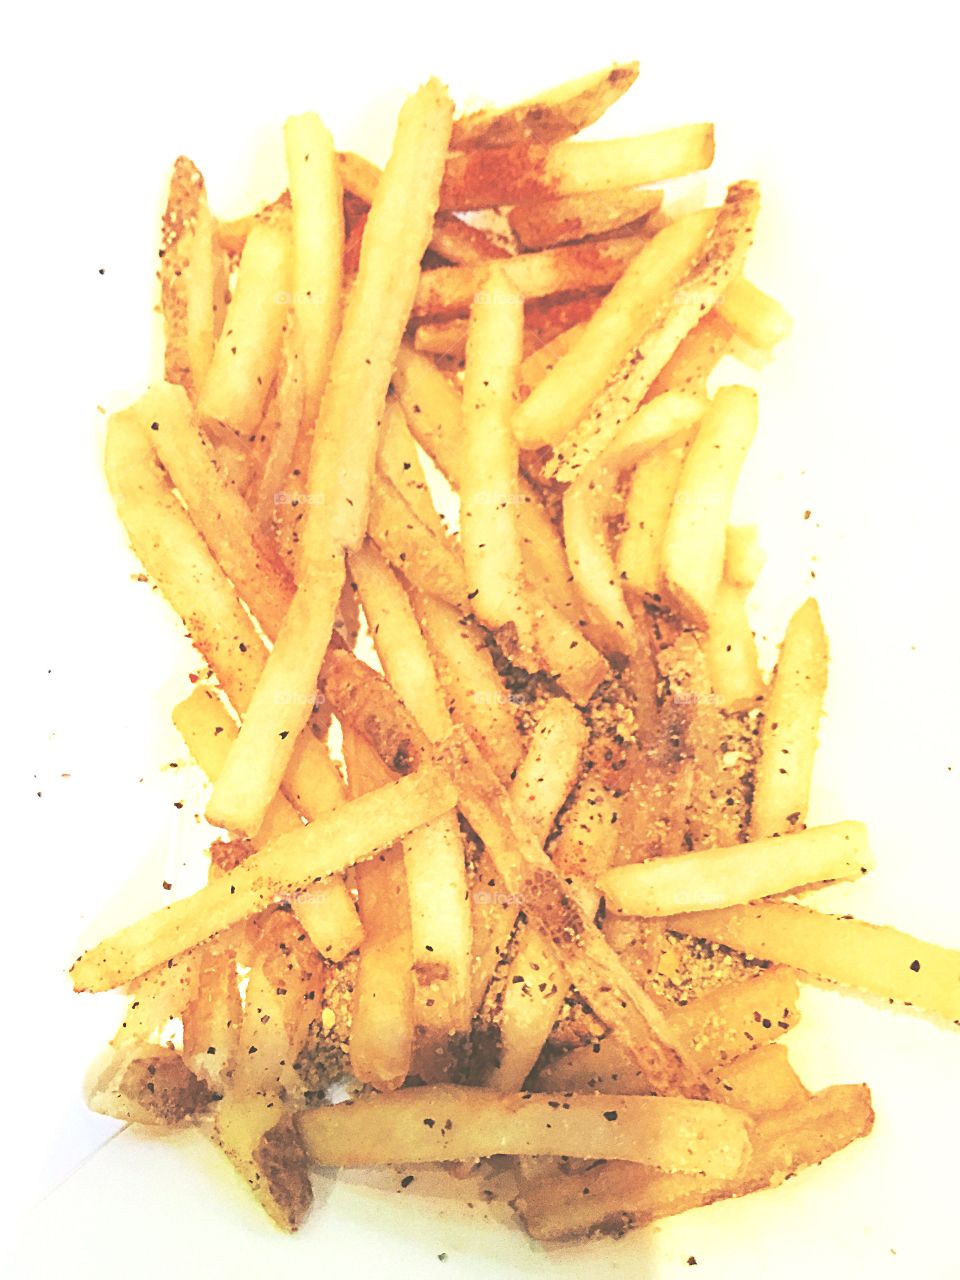 Chucking Fries Professionally. I took this snapshot at the perfect time and in the perfect place:) Pictures this great don't show up every day!